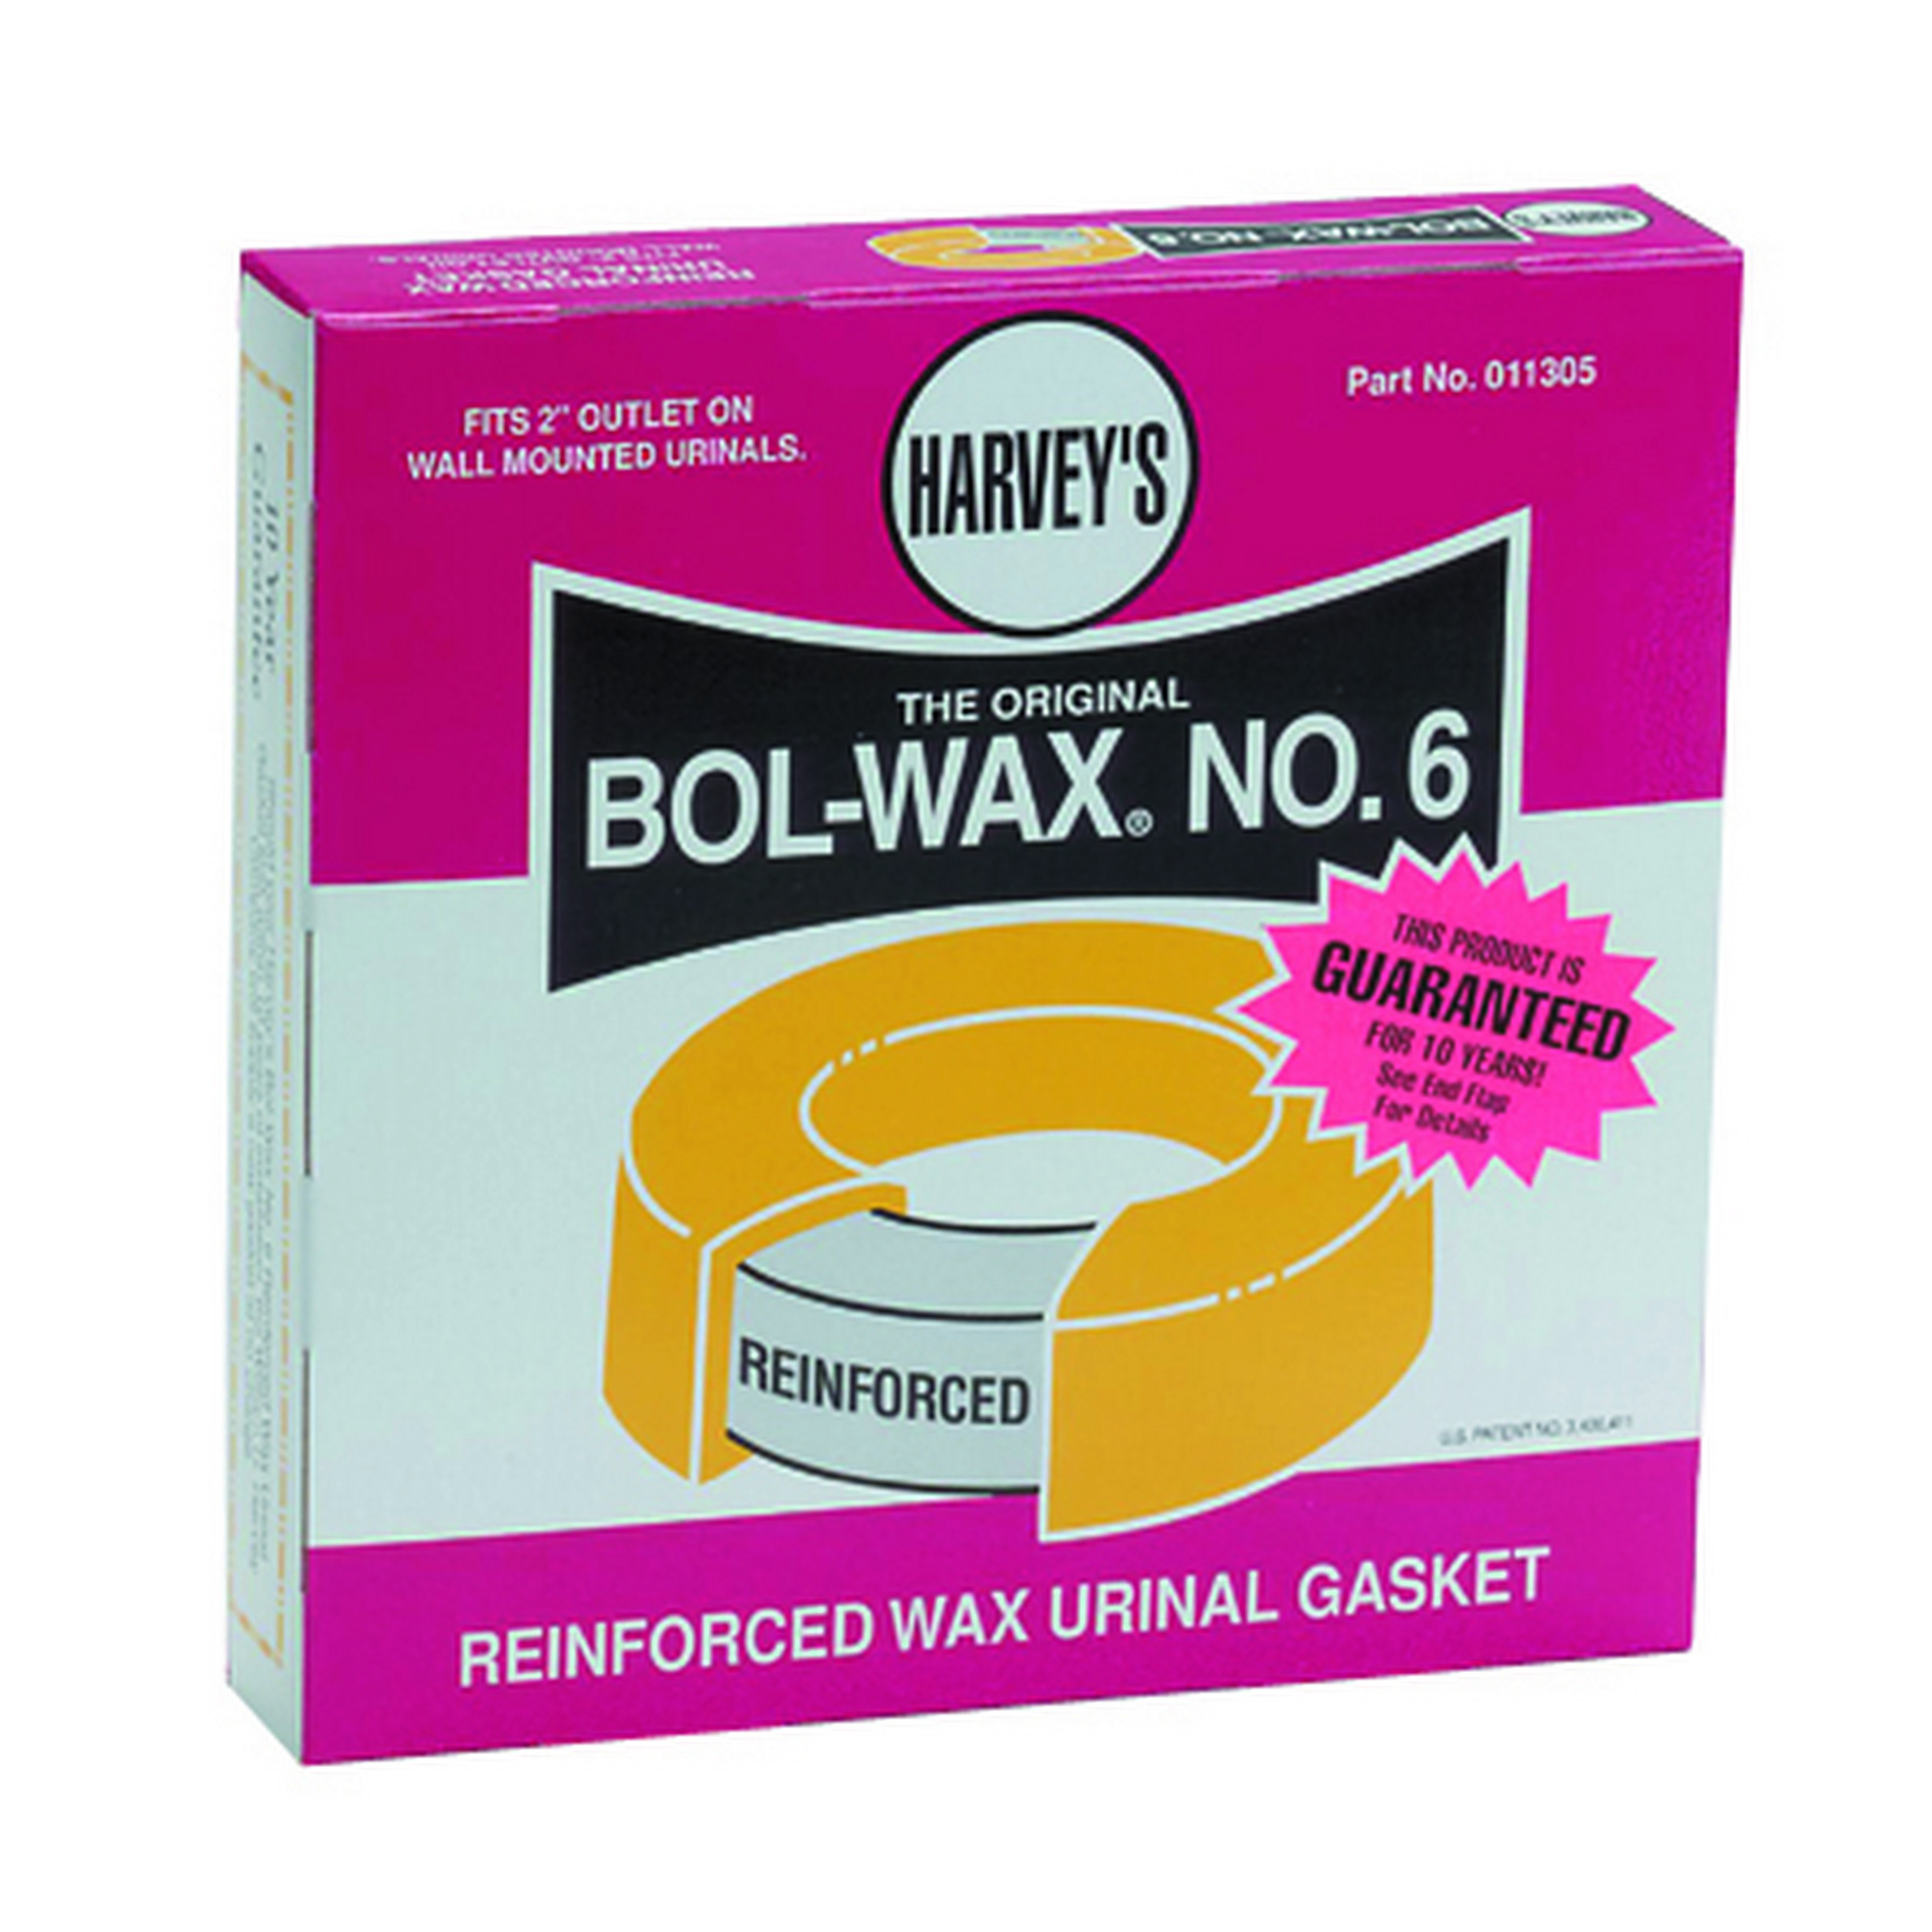 William H. Harvey 011305 Bol-Wax® No. 6 Specialty Reinforced Wax Gasket, For Use With Floor or Wall Outlet Toilet Bowl